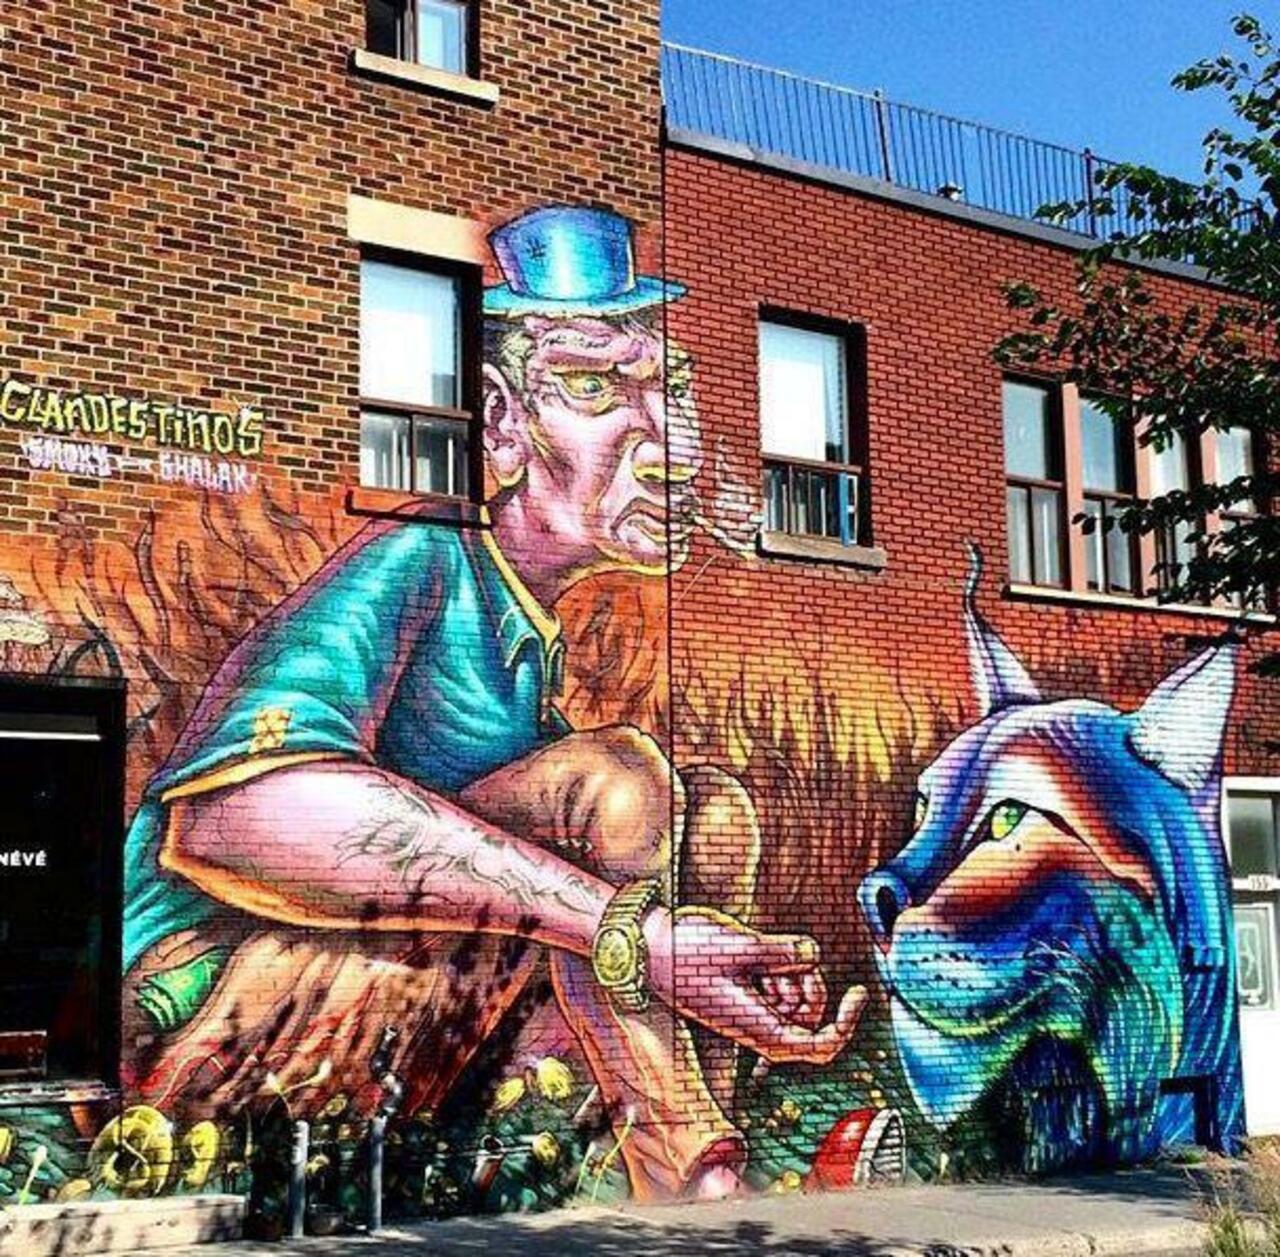 AuKeats: #switch a wall into #streetart by #brunosmojey and #shalak in #montreal #bedifferent #graffiti #art #arte http://t.co/Woin74q3AP